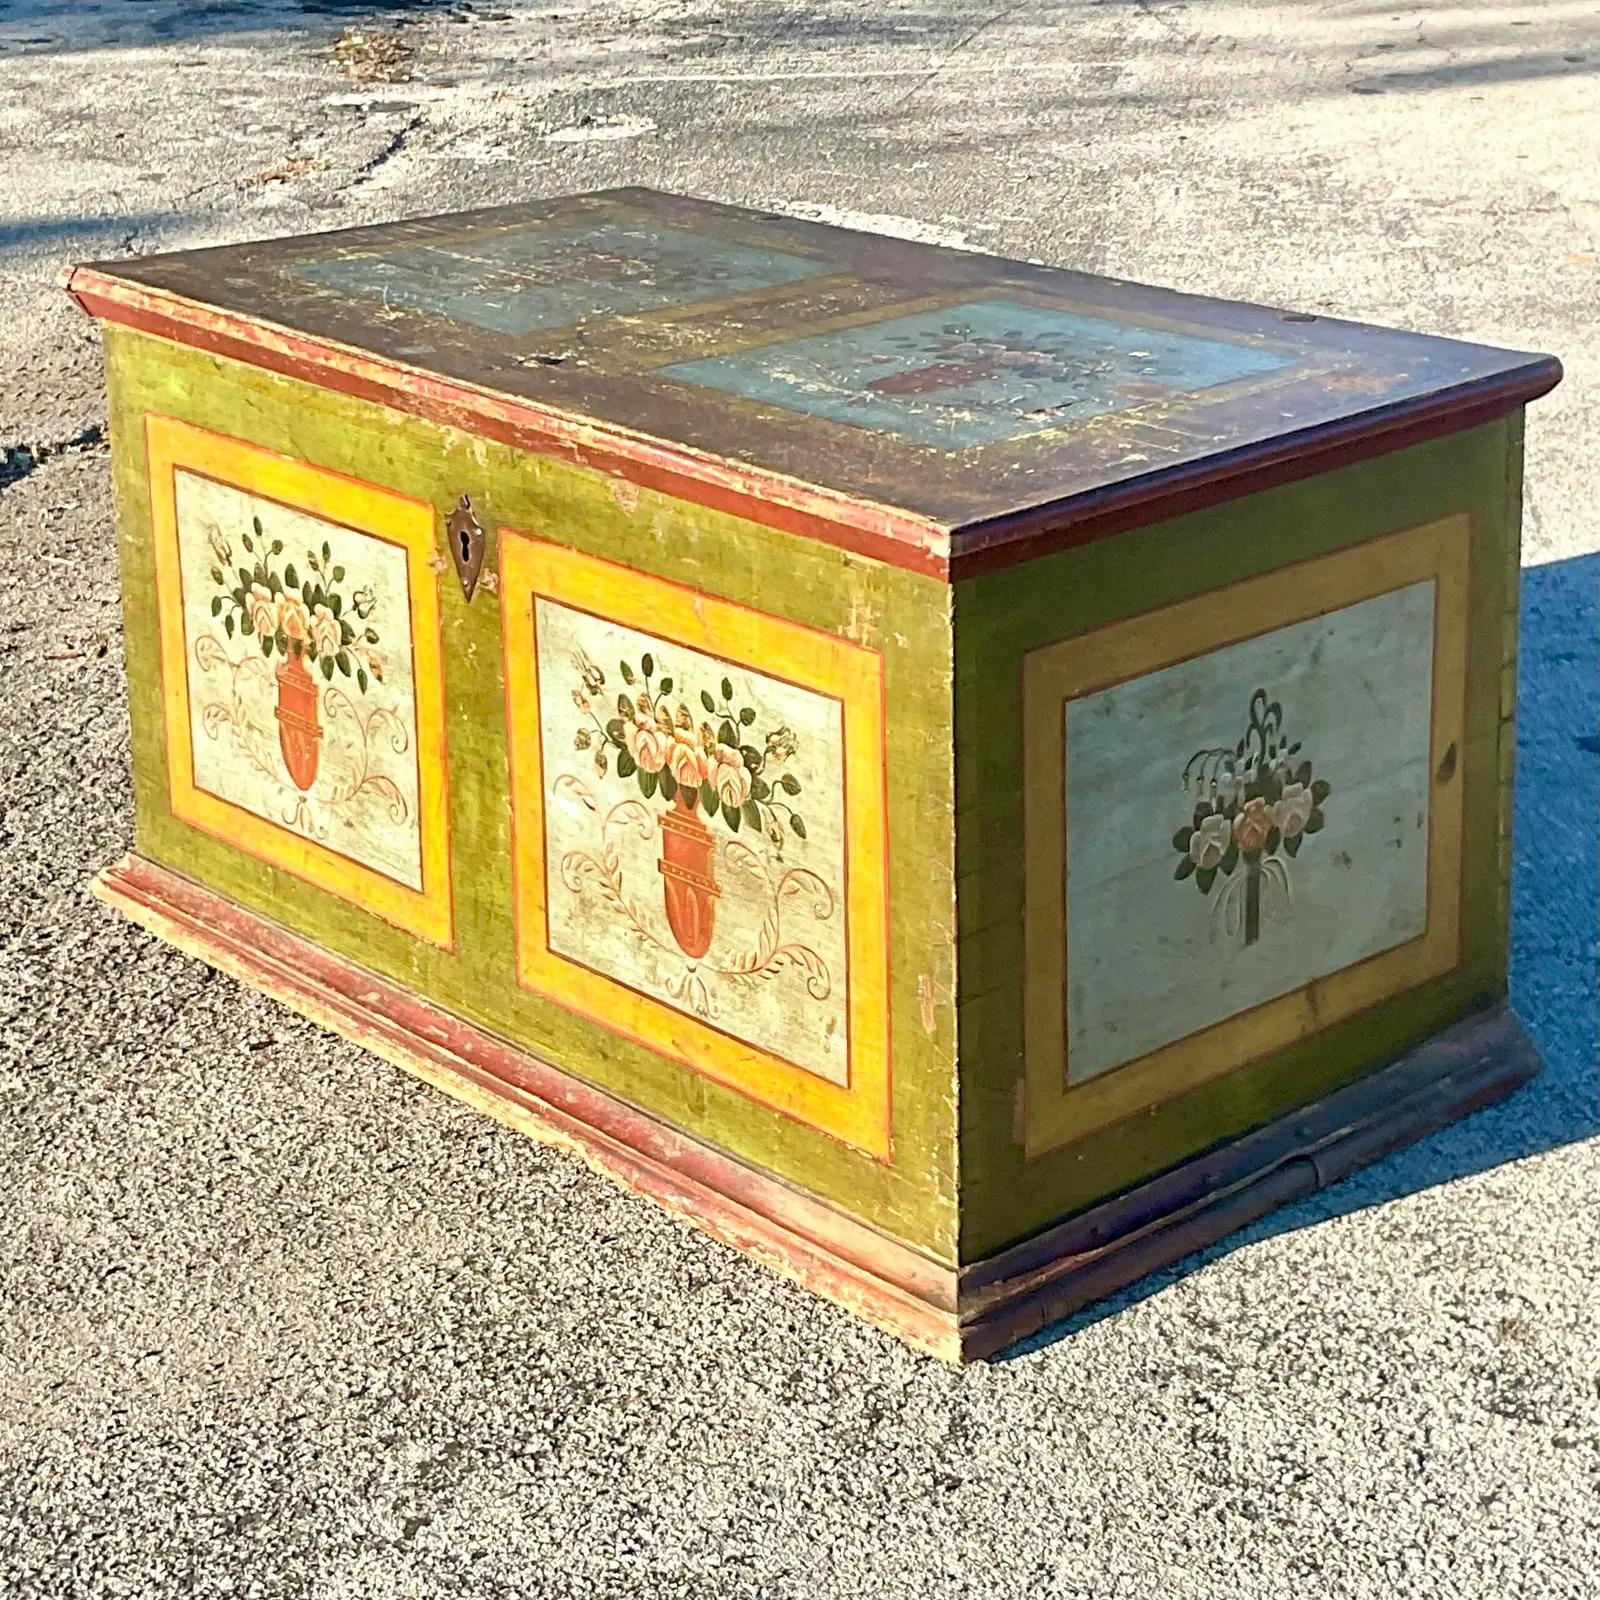 A fantastic vintage Rustic blanket chest. Beautiful hand painted detail in a large scale chest. Made in Norway. Acquired from a Palm beach estate.